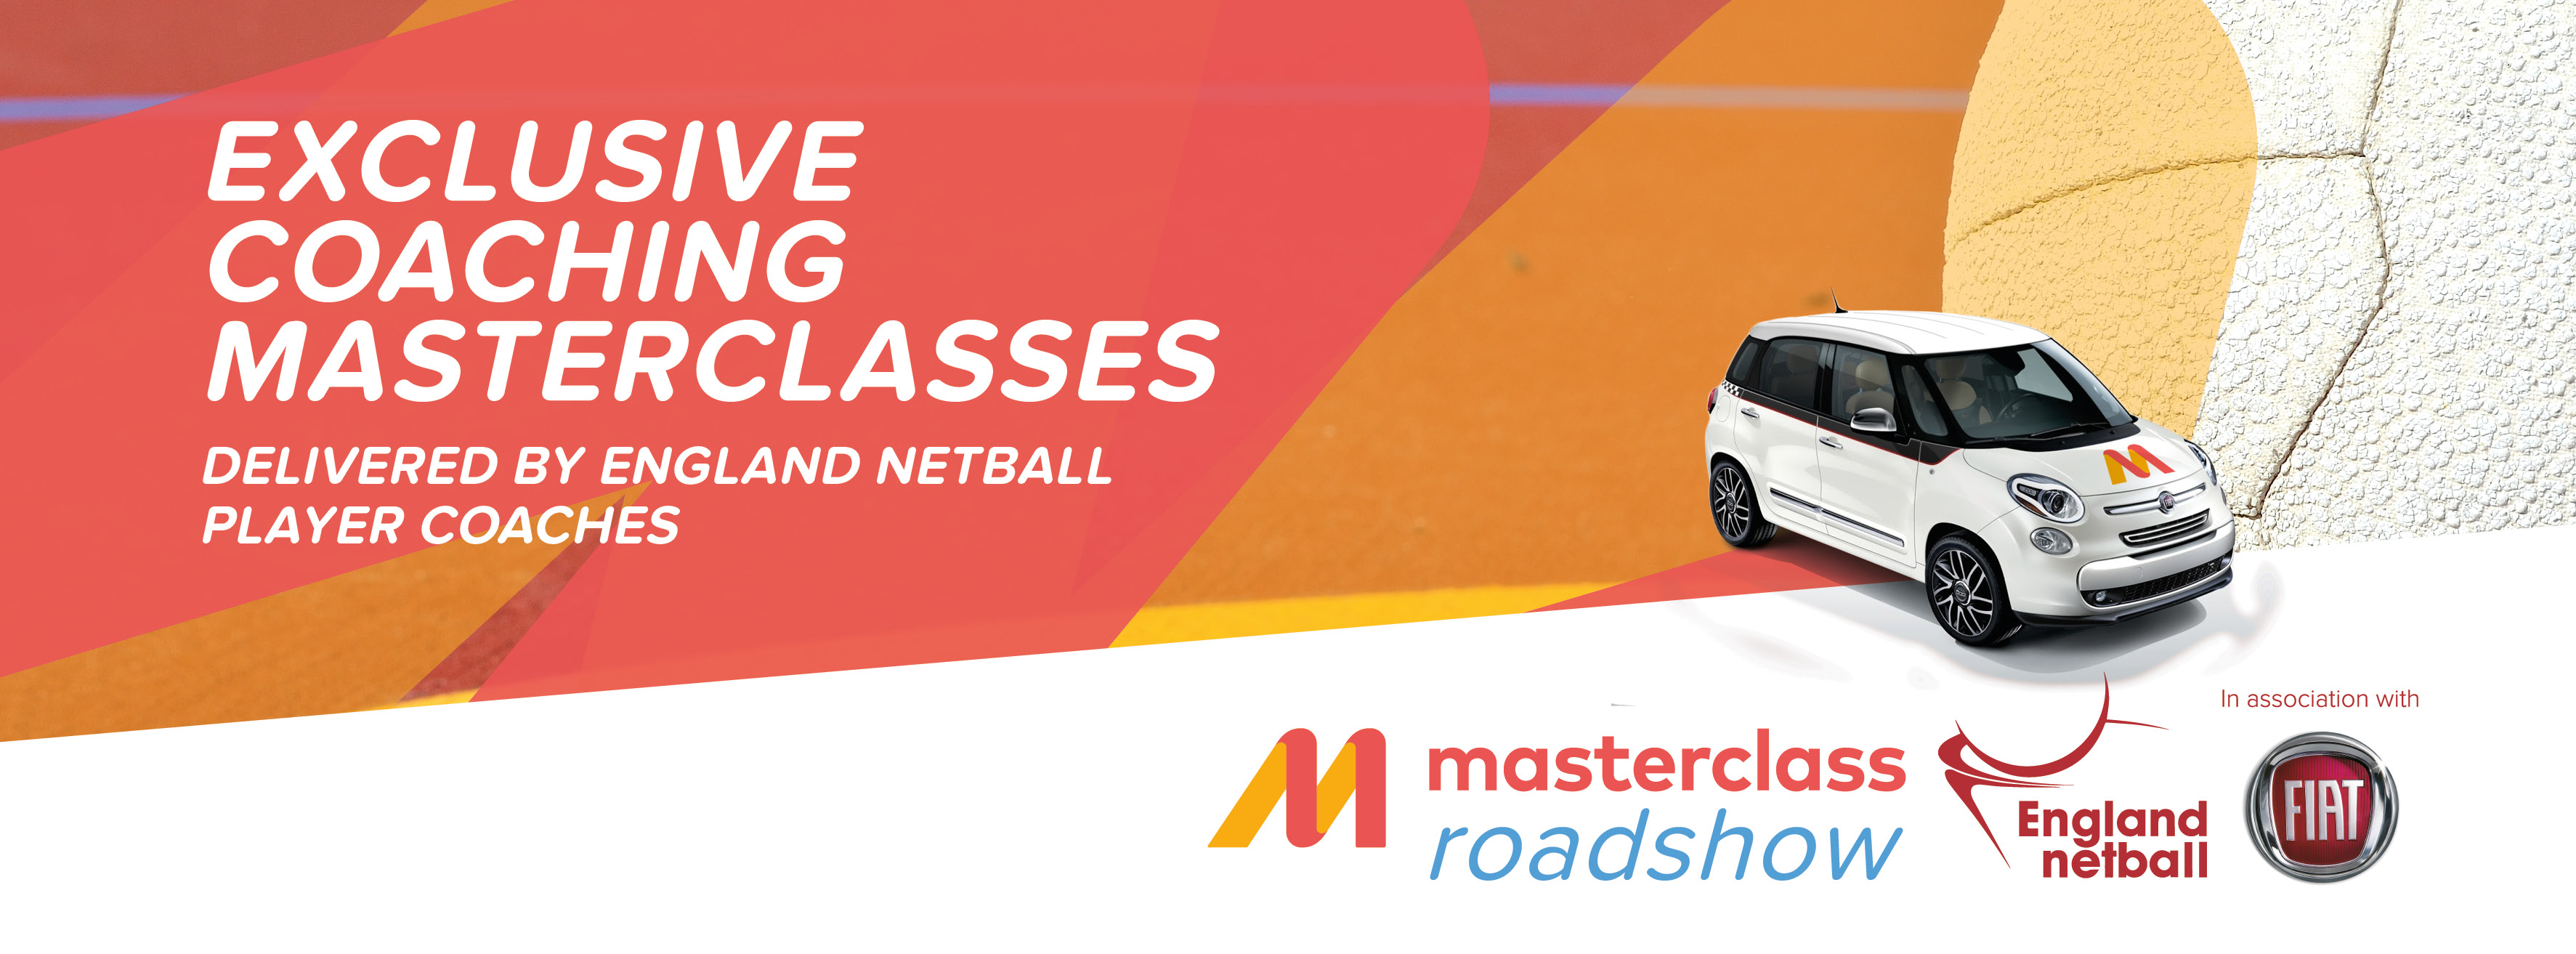 Netball coaching masterclass in association with England Netball and Fiat